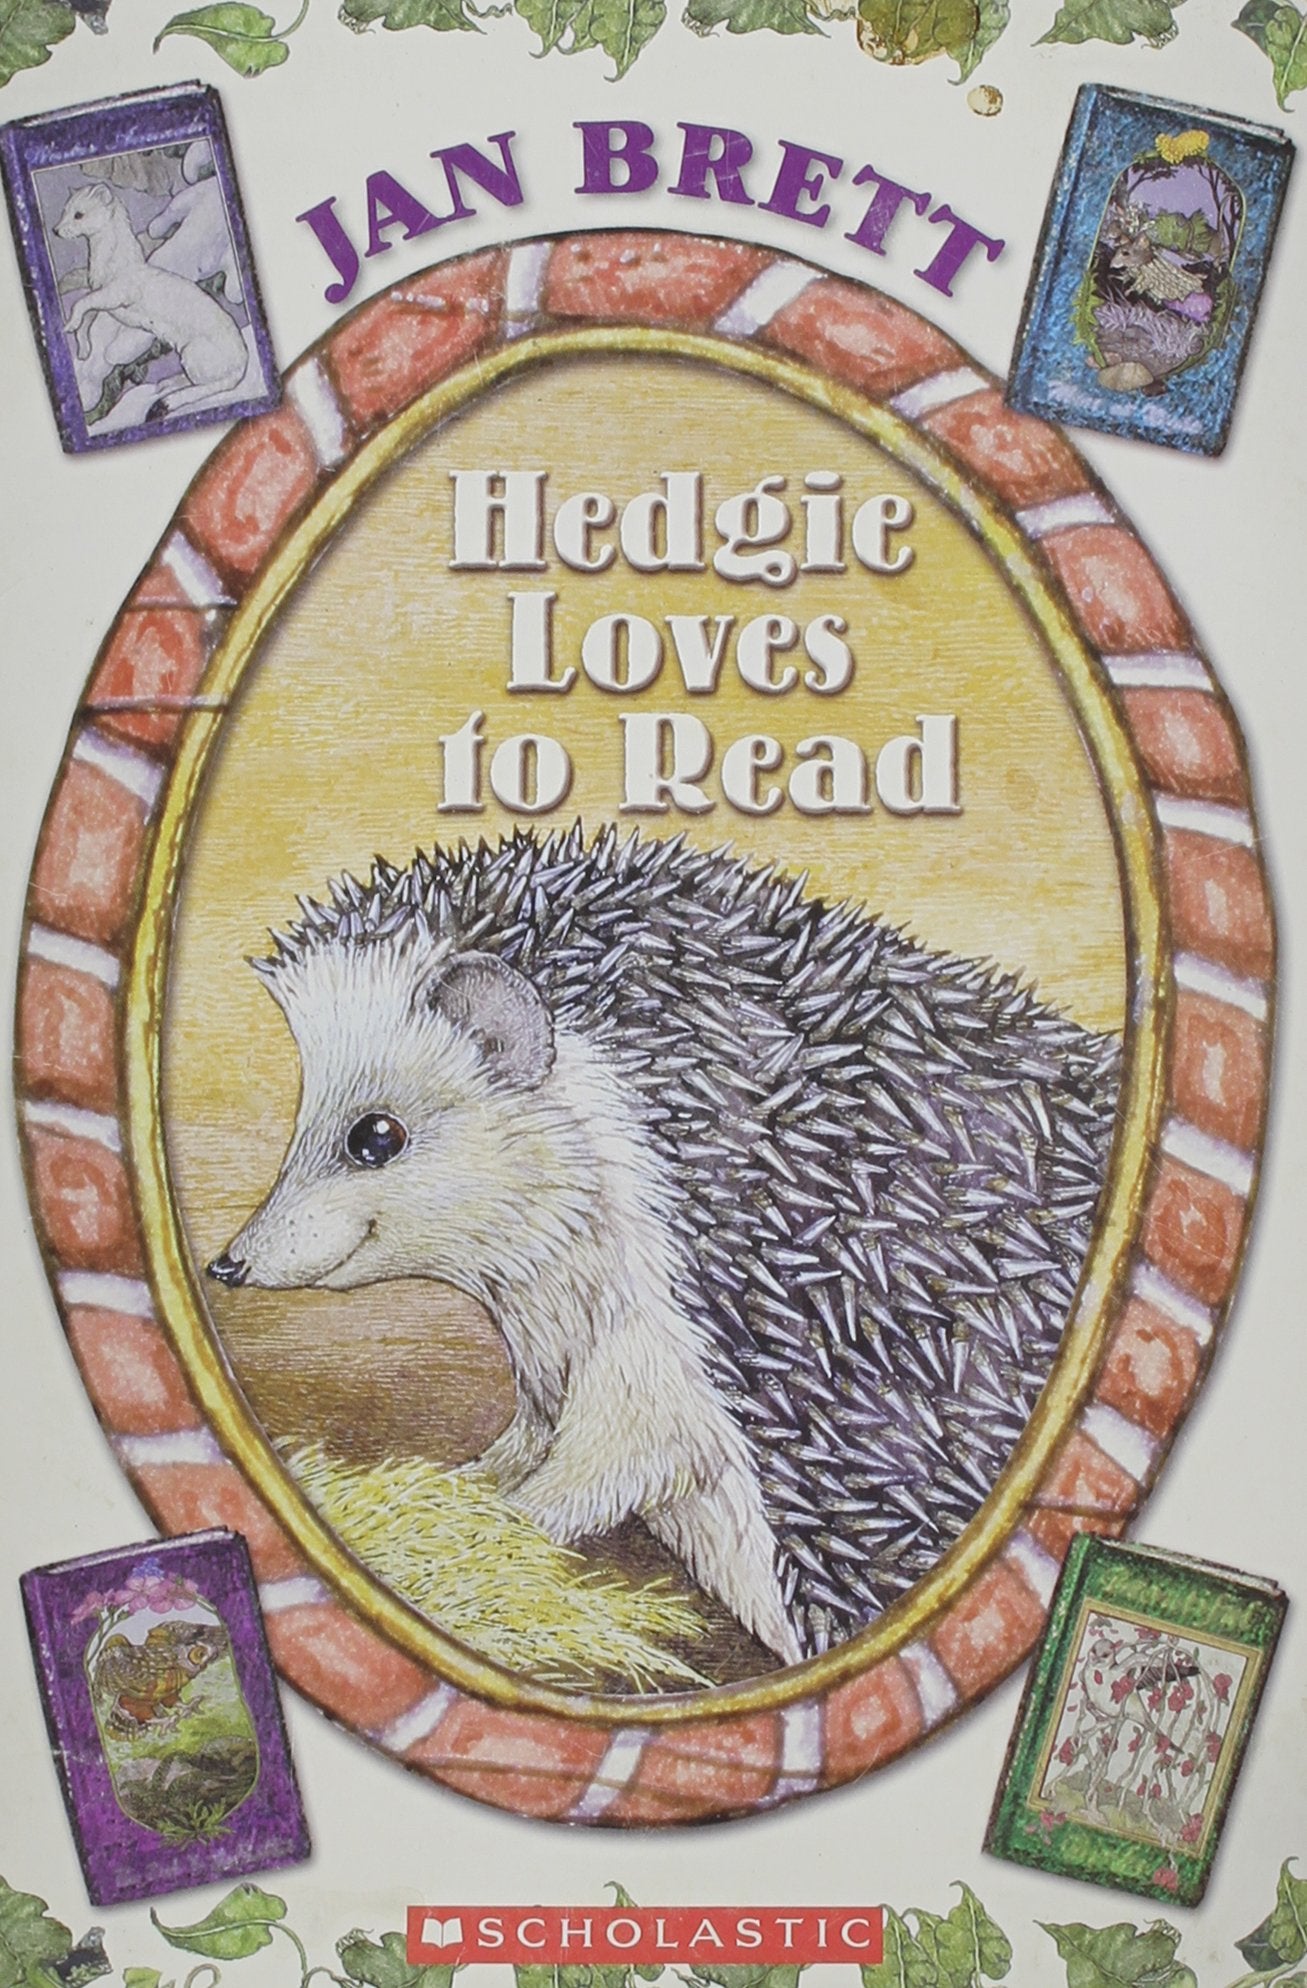 Hedgie Loves to Read by Jan Brett — Book 2 of The Hedgie Series